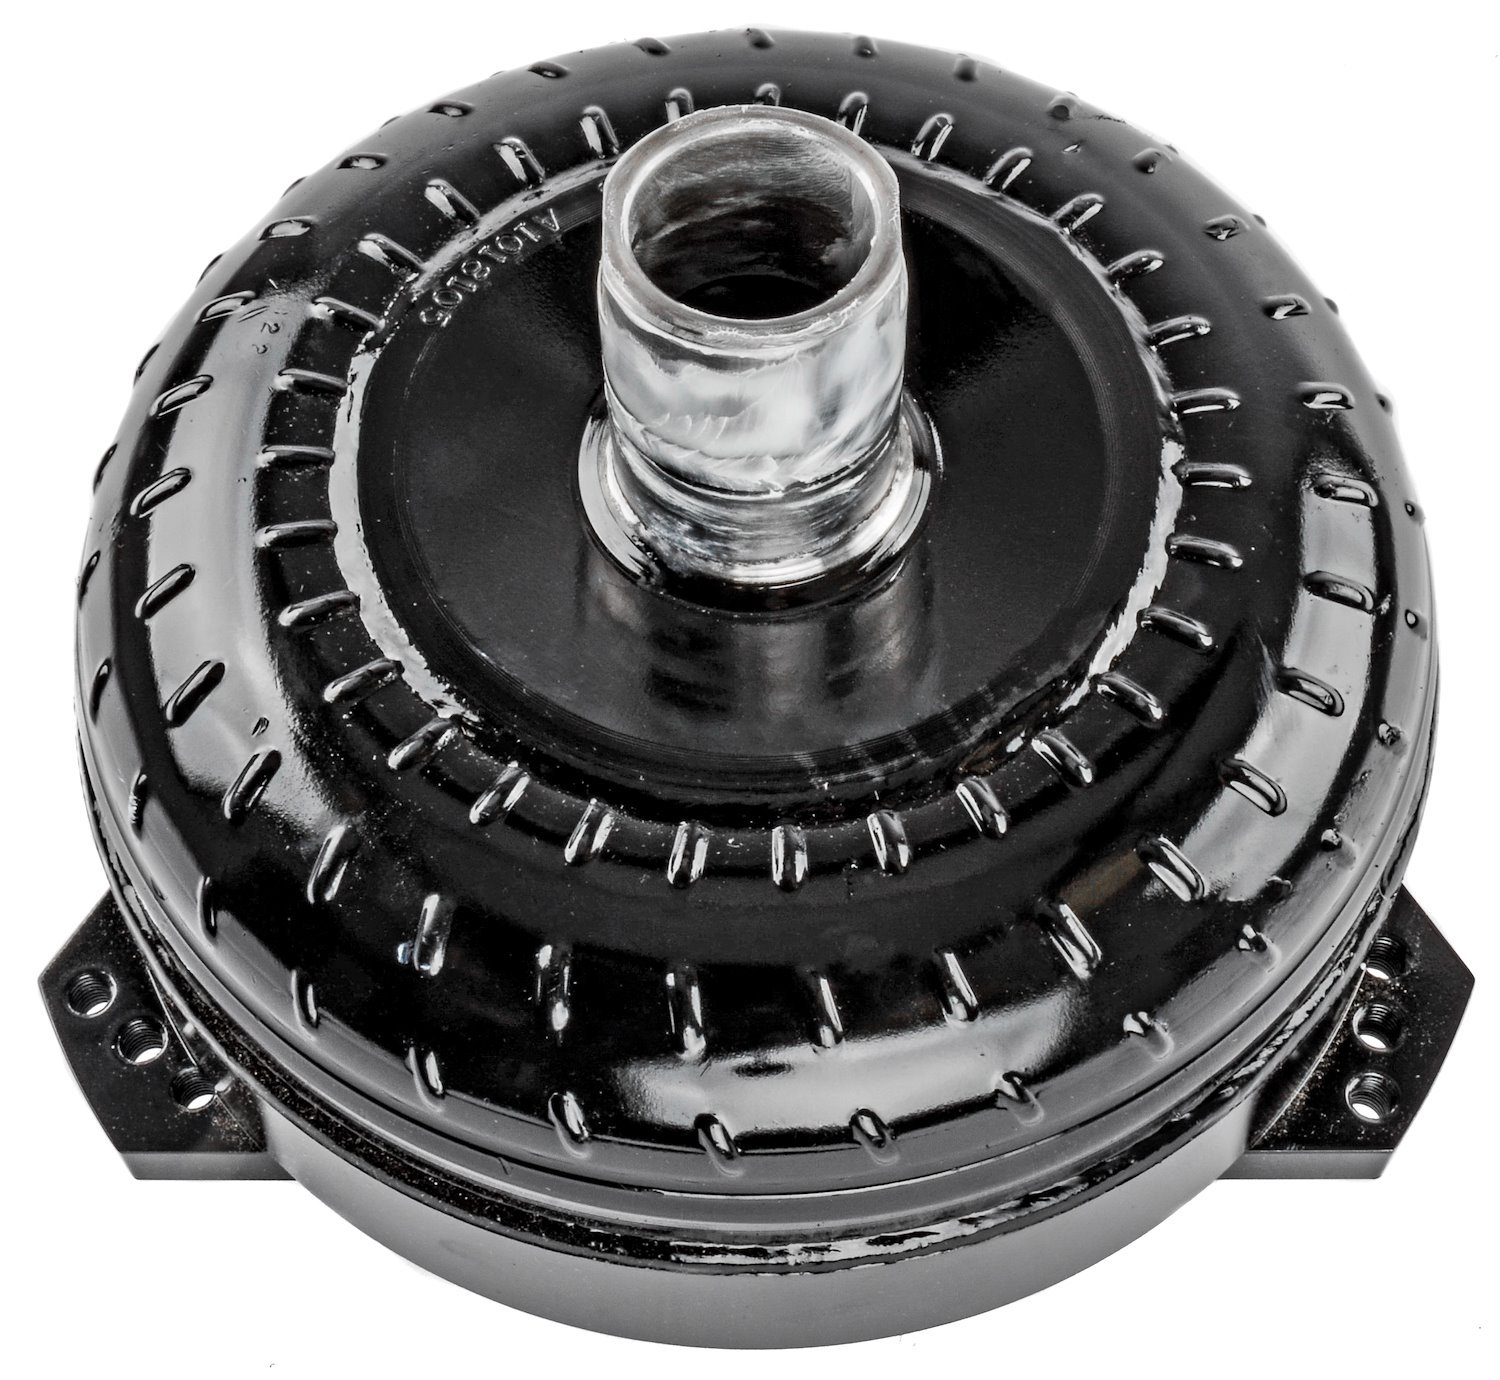 Torque Converter for GM 700R4 [2800-3200 RPM Stall Speed]